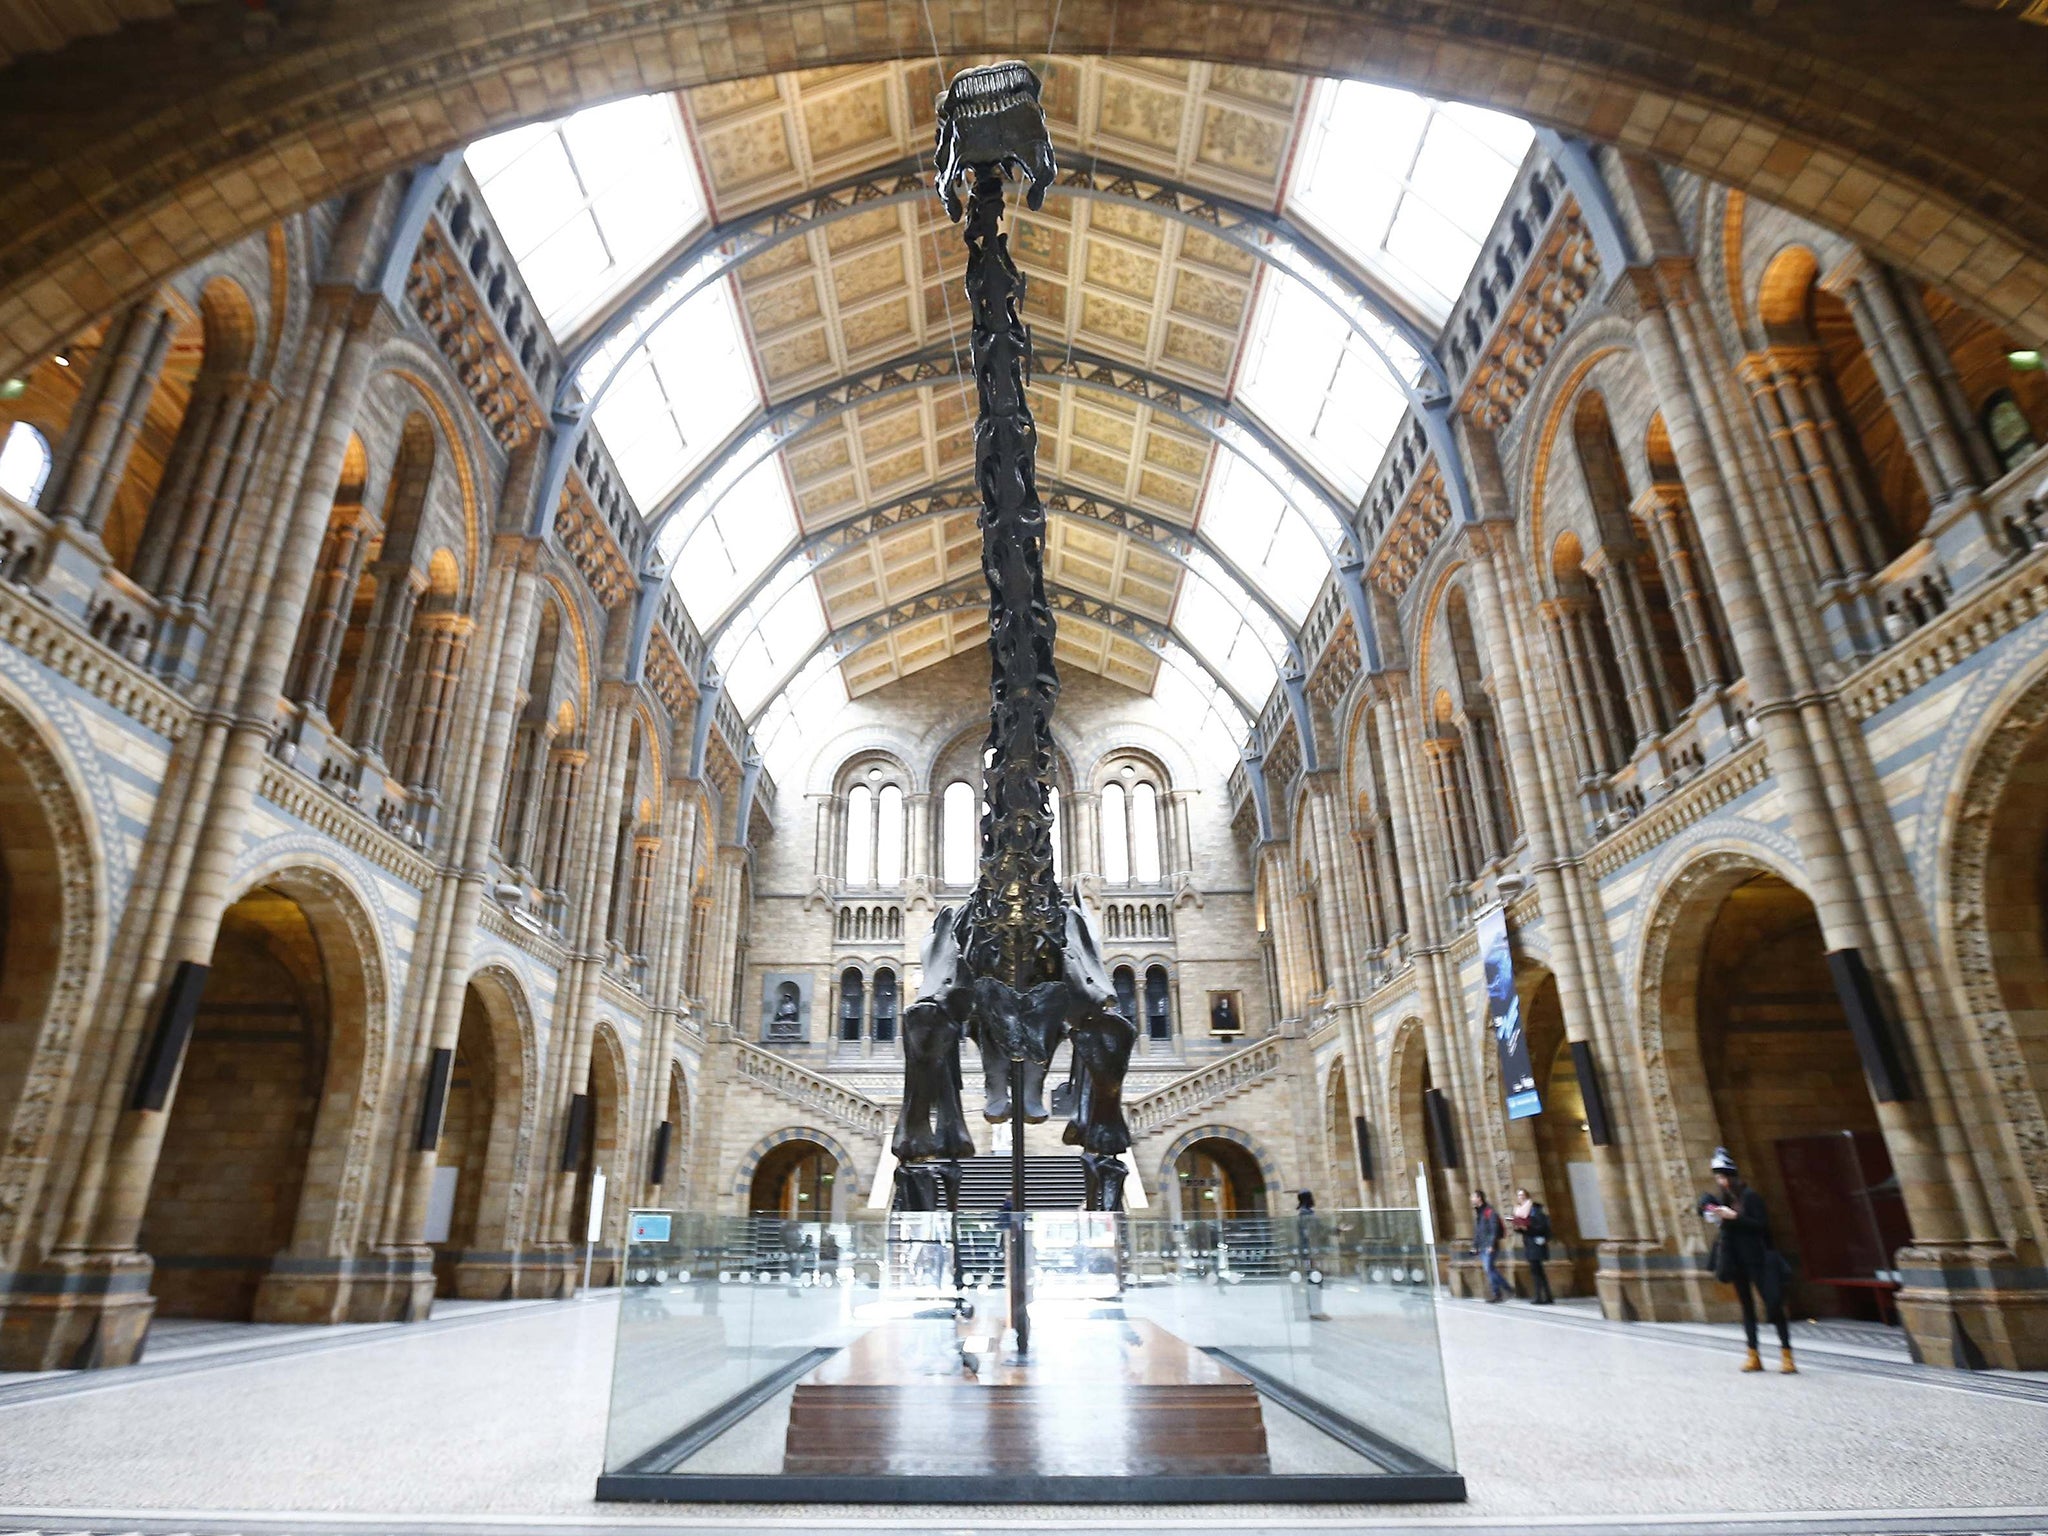 Dippy will be replaced by the giant skeleton of a blue whale in 2017